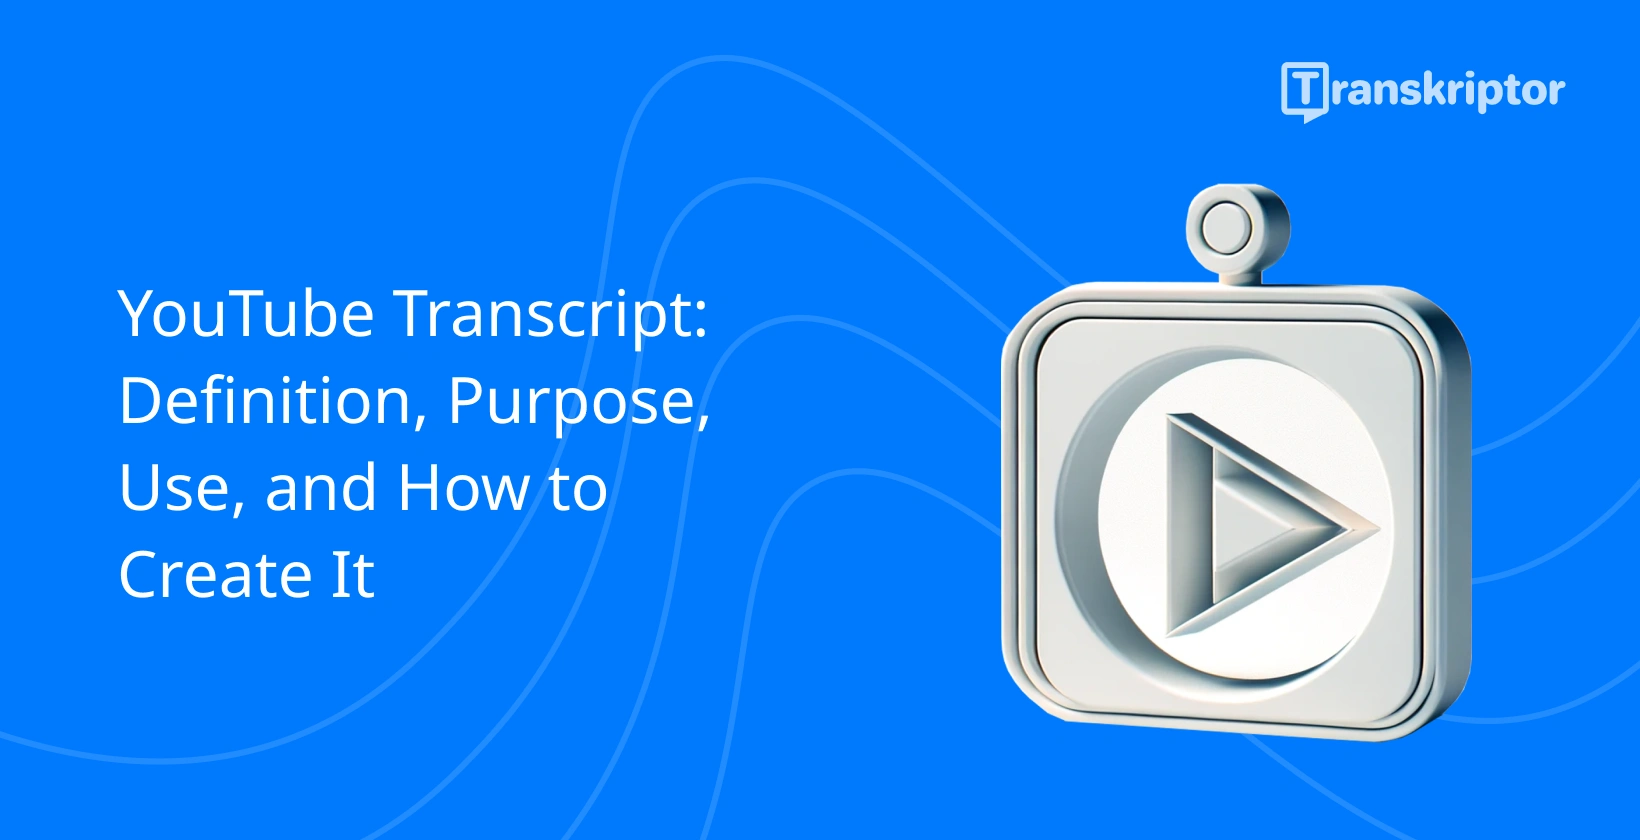 Transcribe YouTube Shorts symbolized by a play button and documents inside a 3D frame on a blue background.